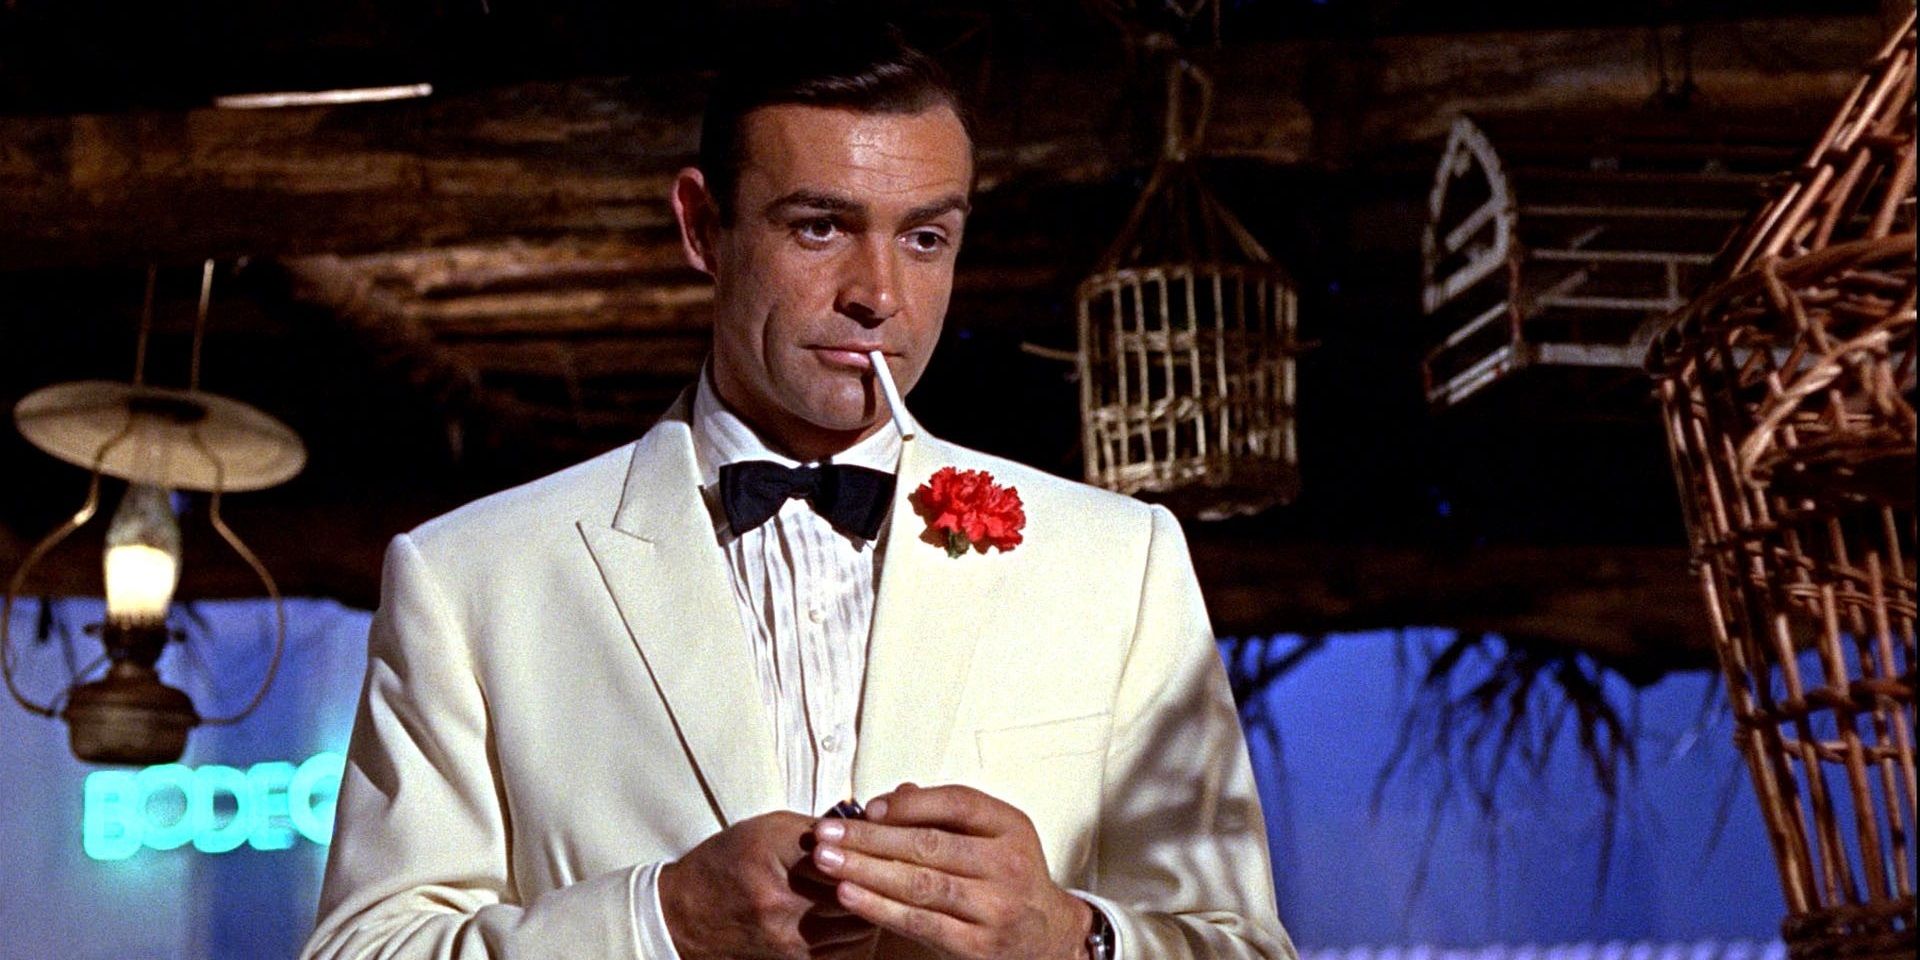 Sean Connery as James Bond in the opening of Goldfinger